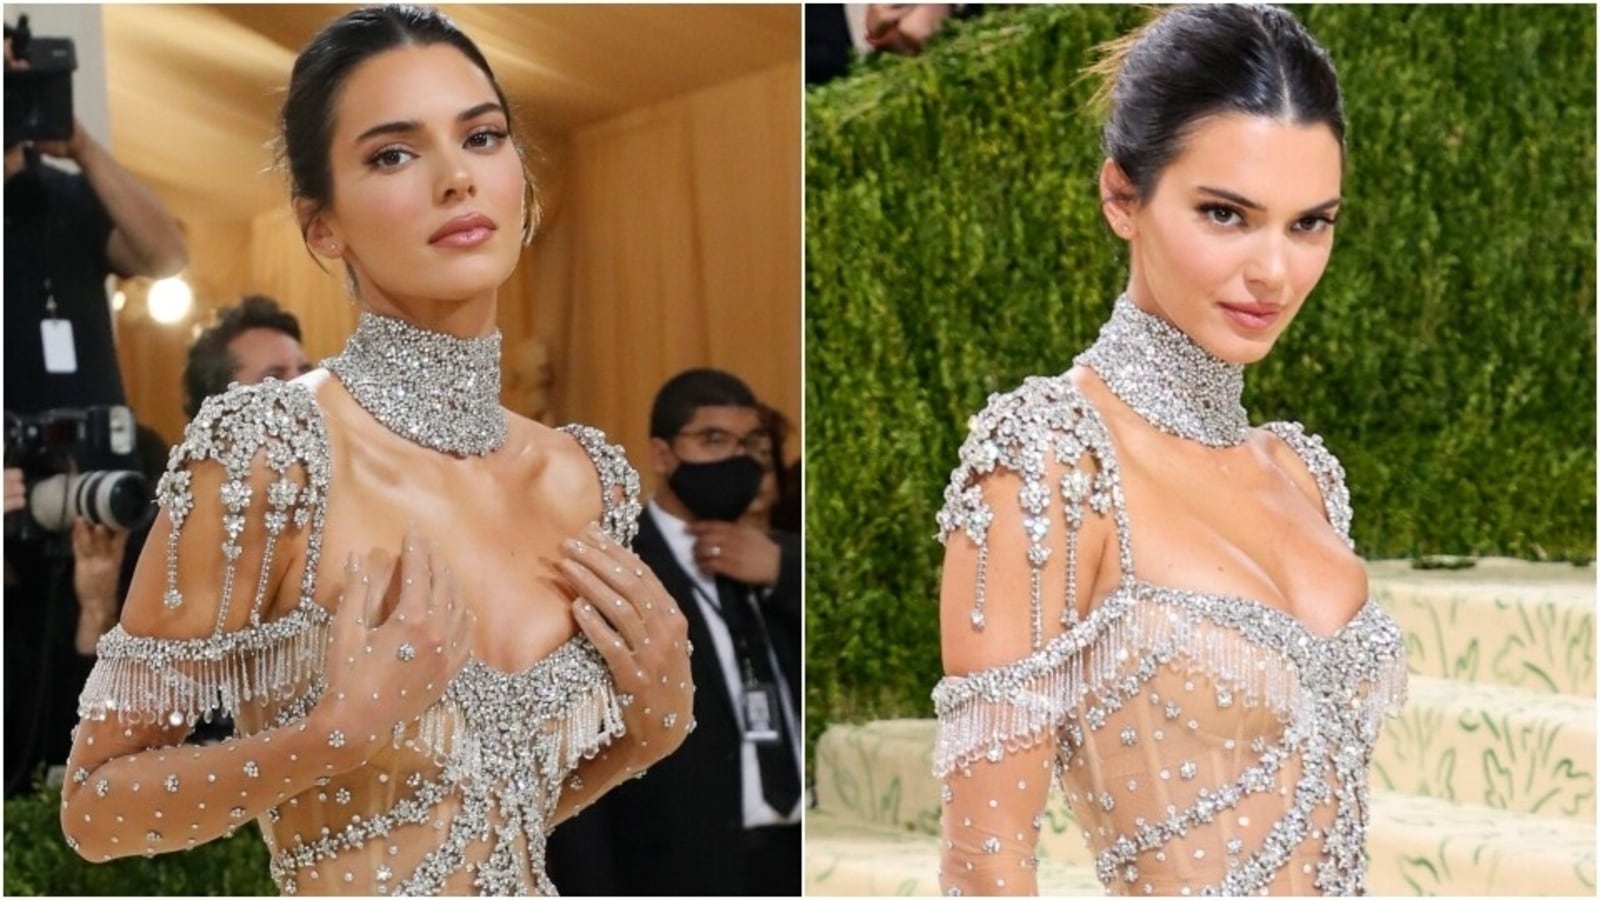 Kendall Jenner Wears See-Through Bodycon Dress to 818 Party